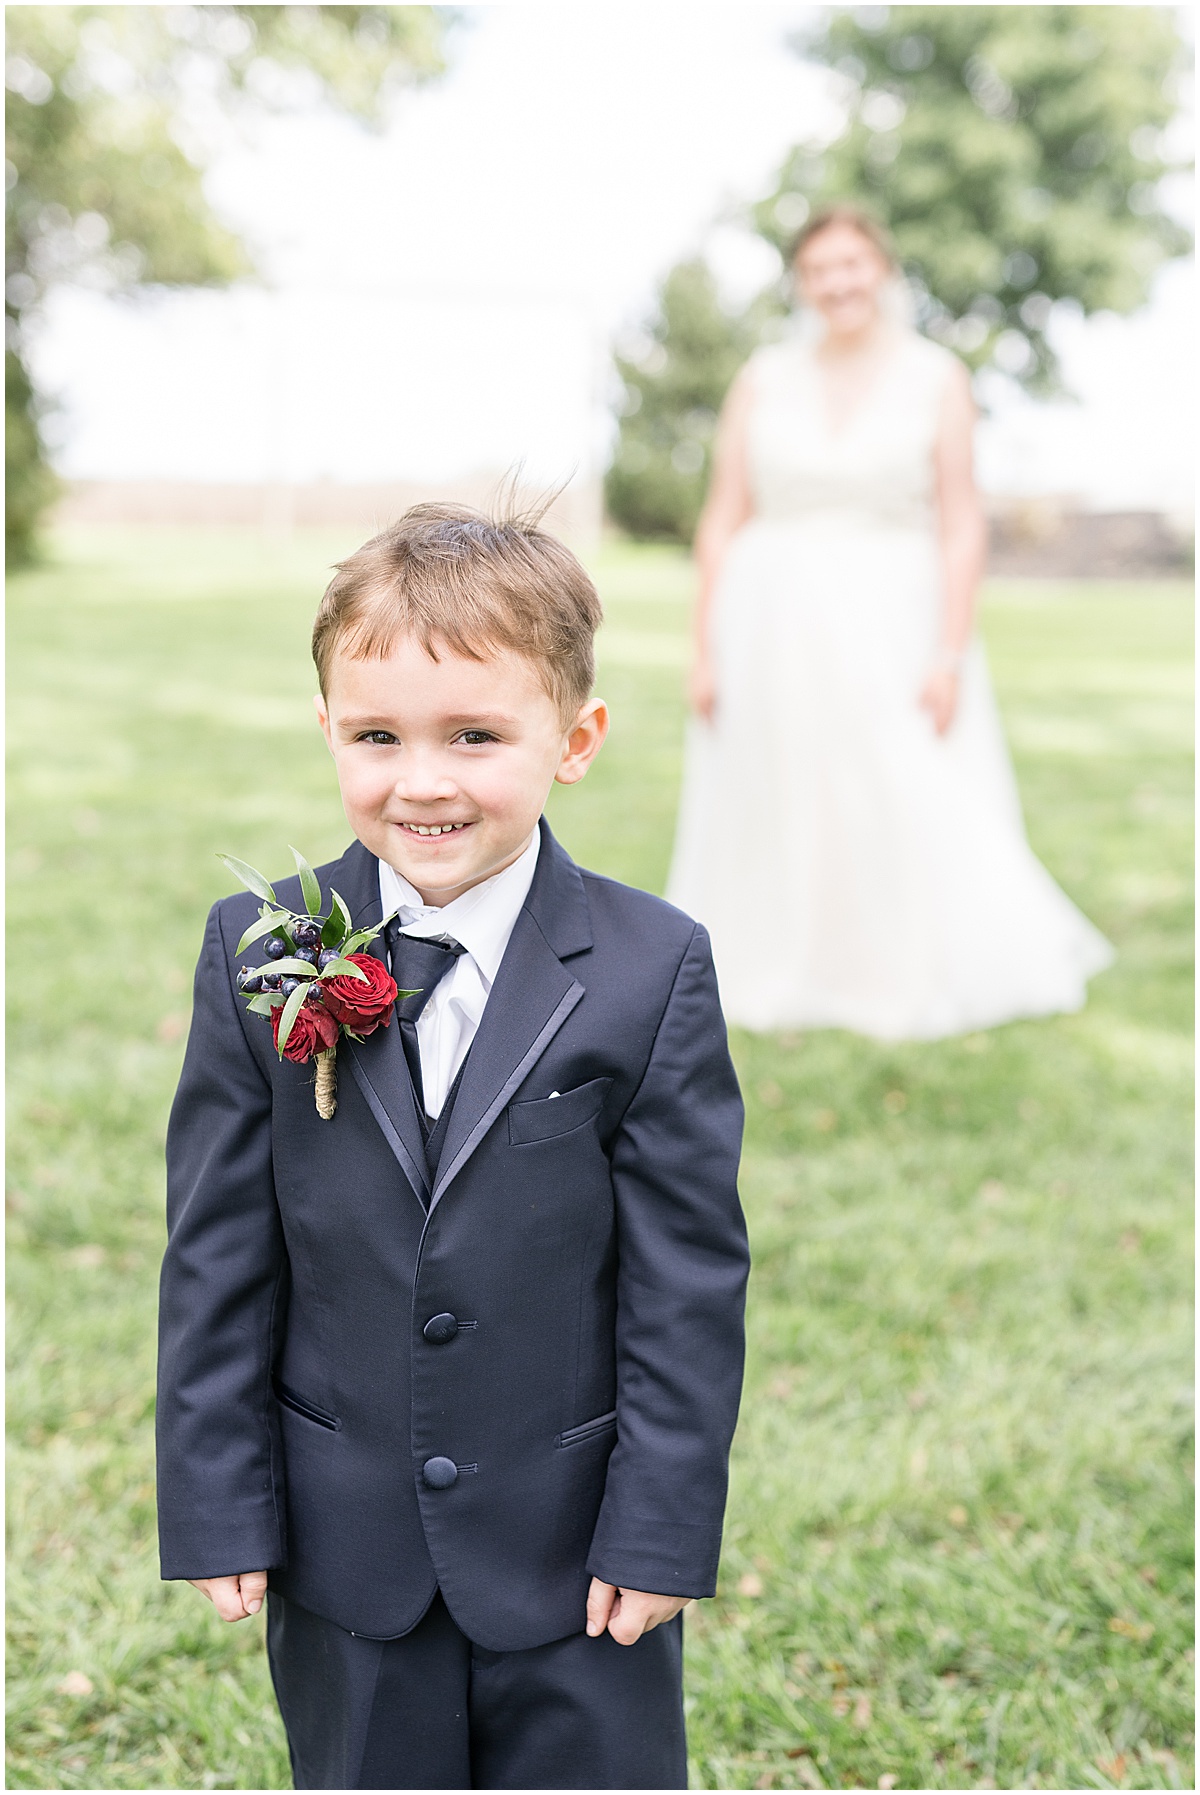 first look at fall wedding at Vintage Oaks Banquet Barn in Delphi, Indiana